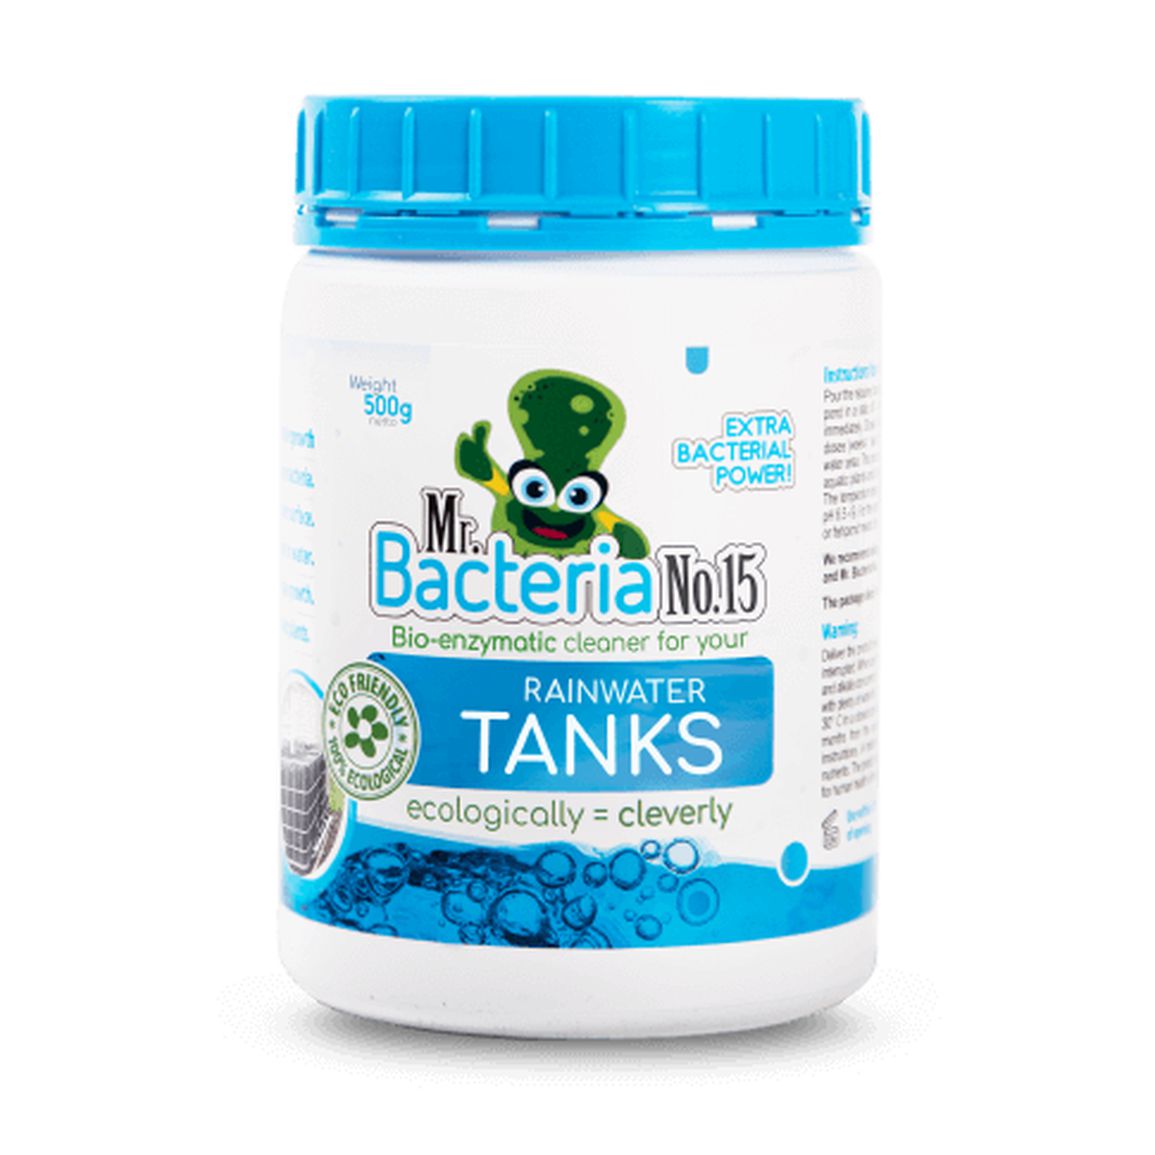 Bio-enzymatic cleaner for your RAINWATER TANKS 500g